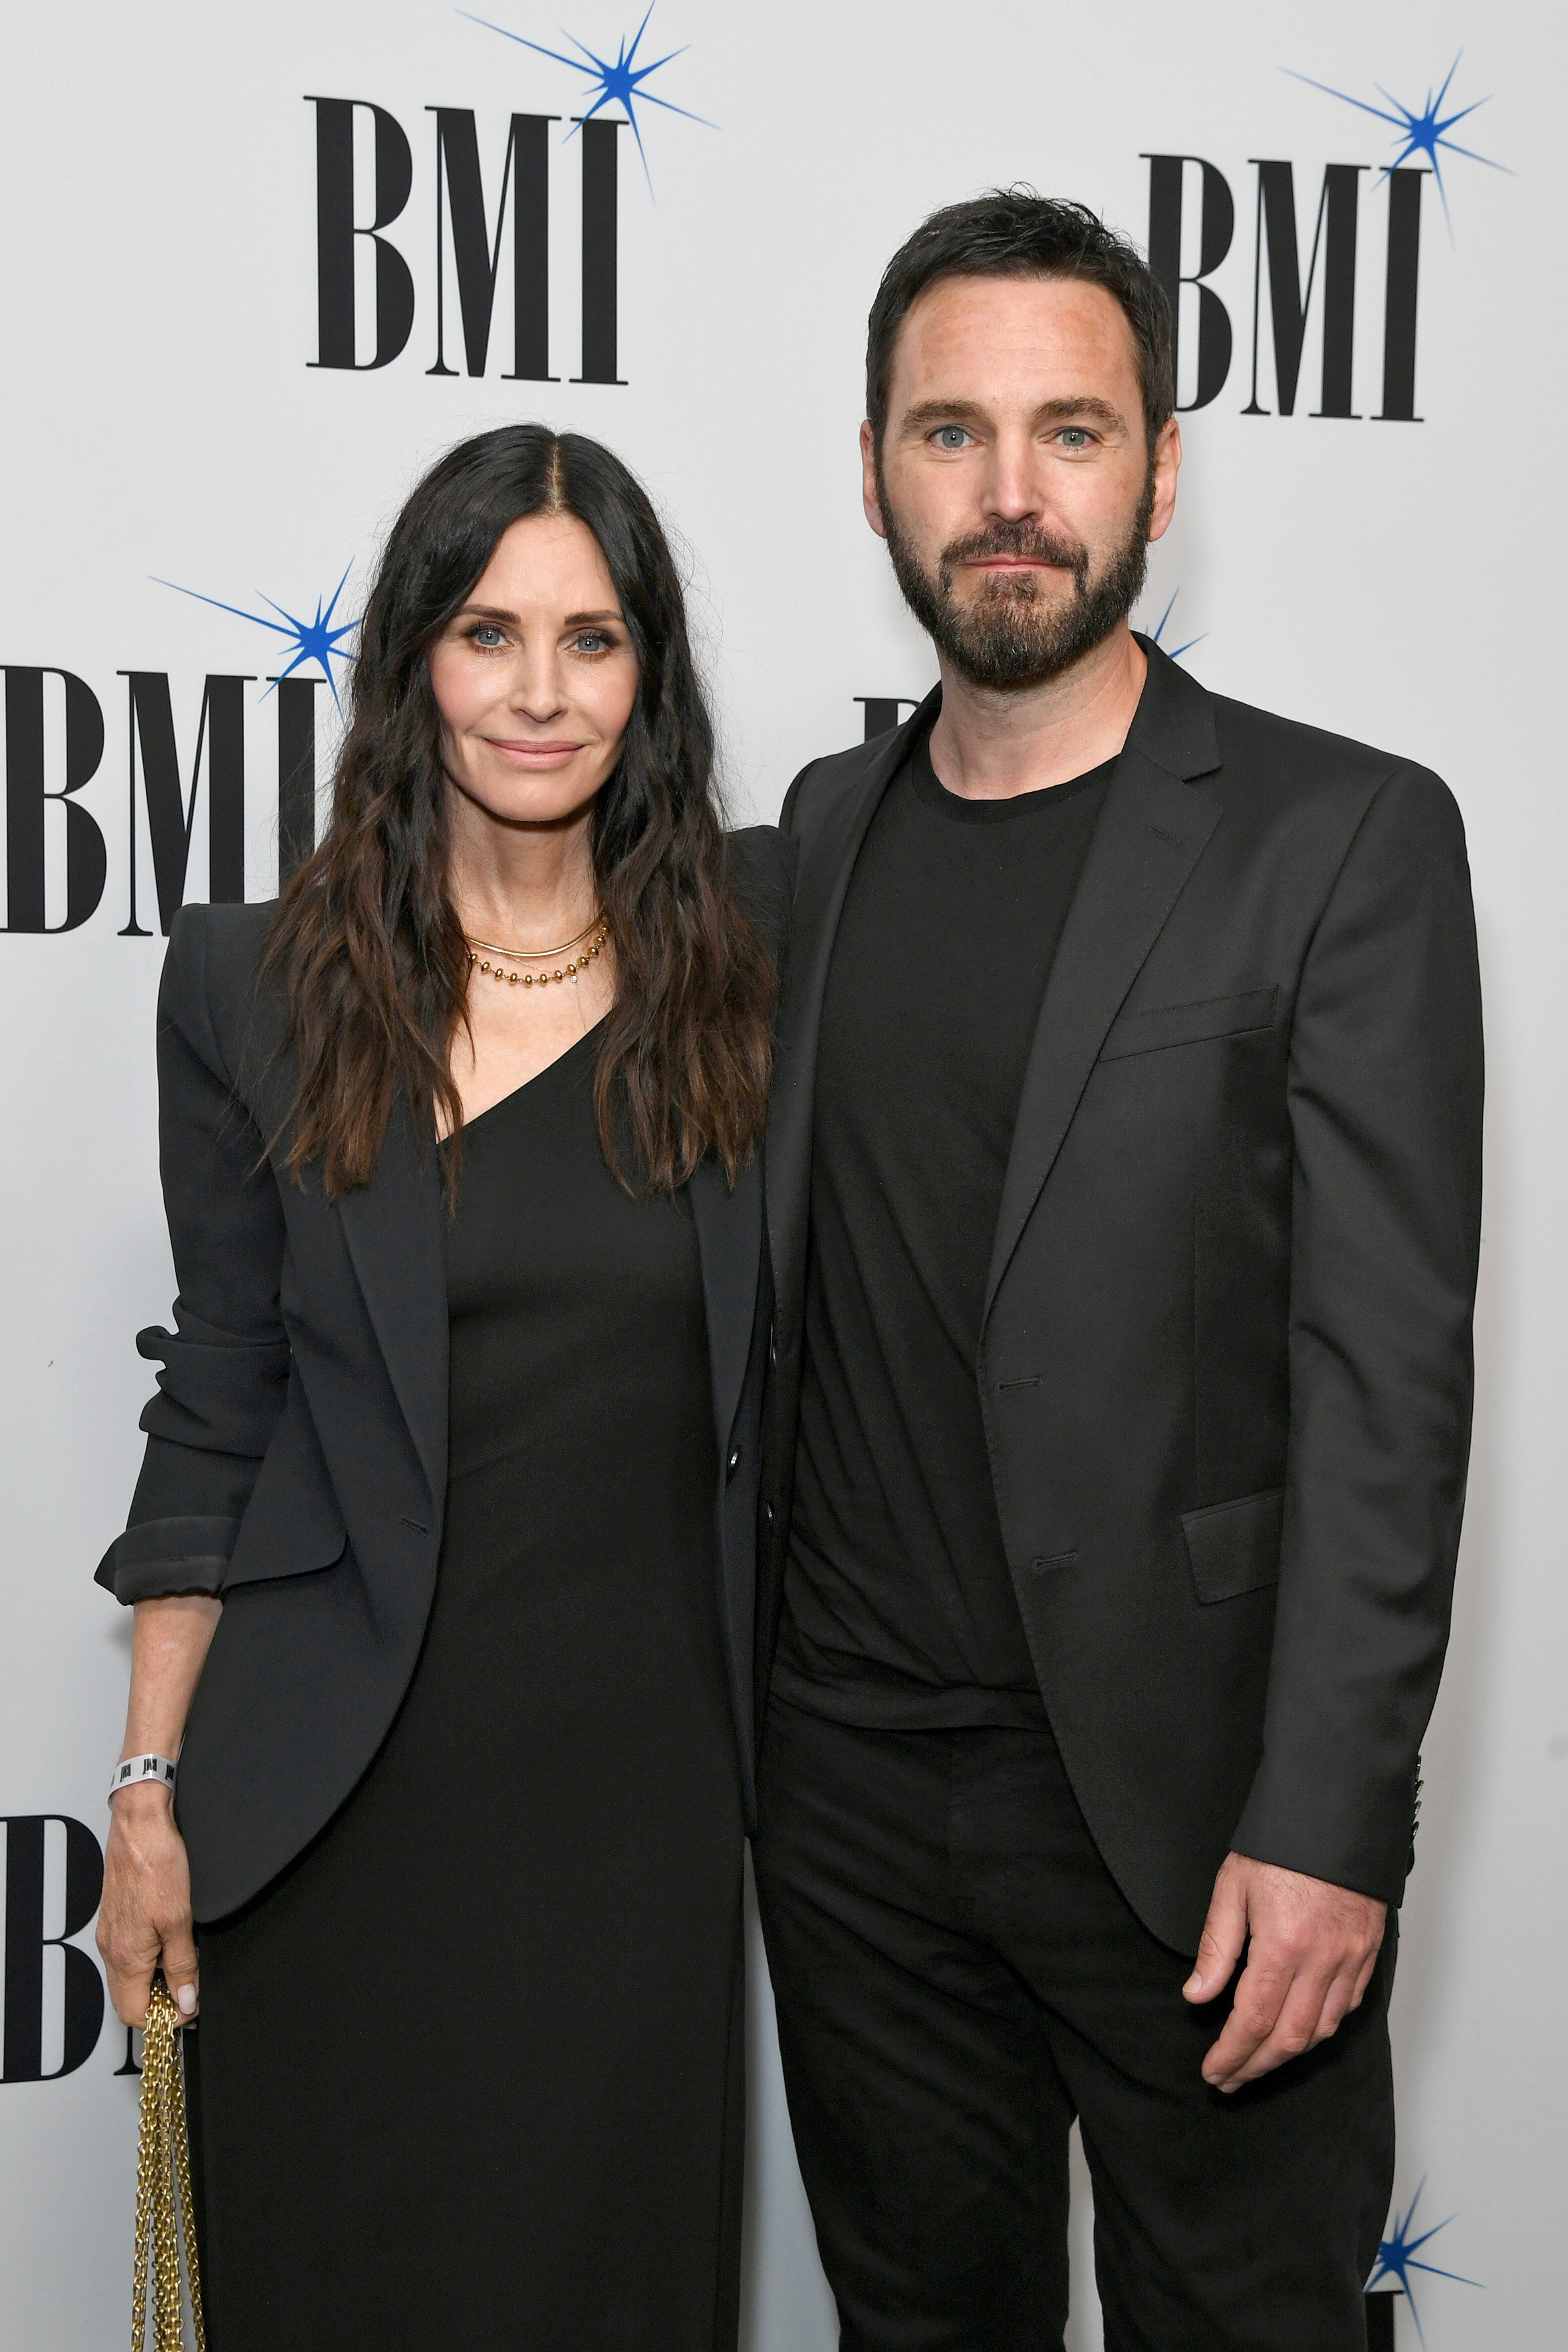 Courteney Cox and Johnny McDaid at an event